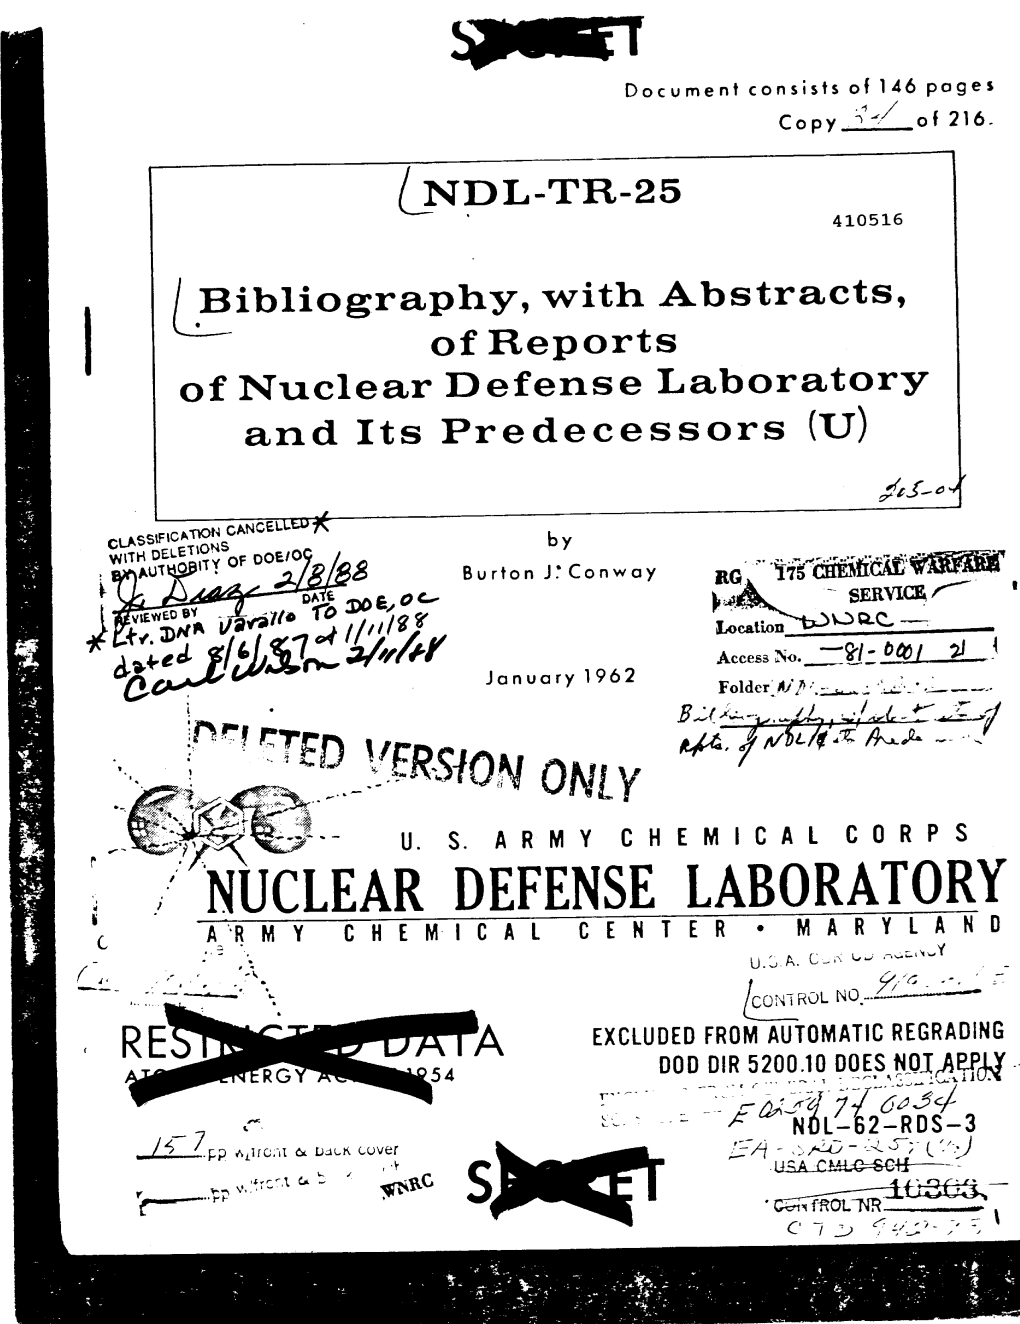 Bibliography, with Abstracts, of Reports of Nuclear Defense 1Ab0rjt0r% and Its Predecessors (U)